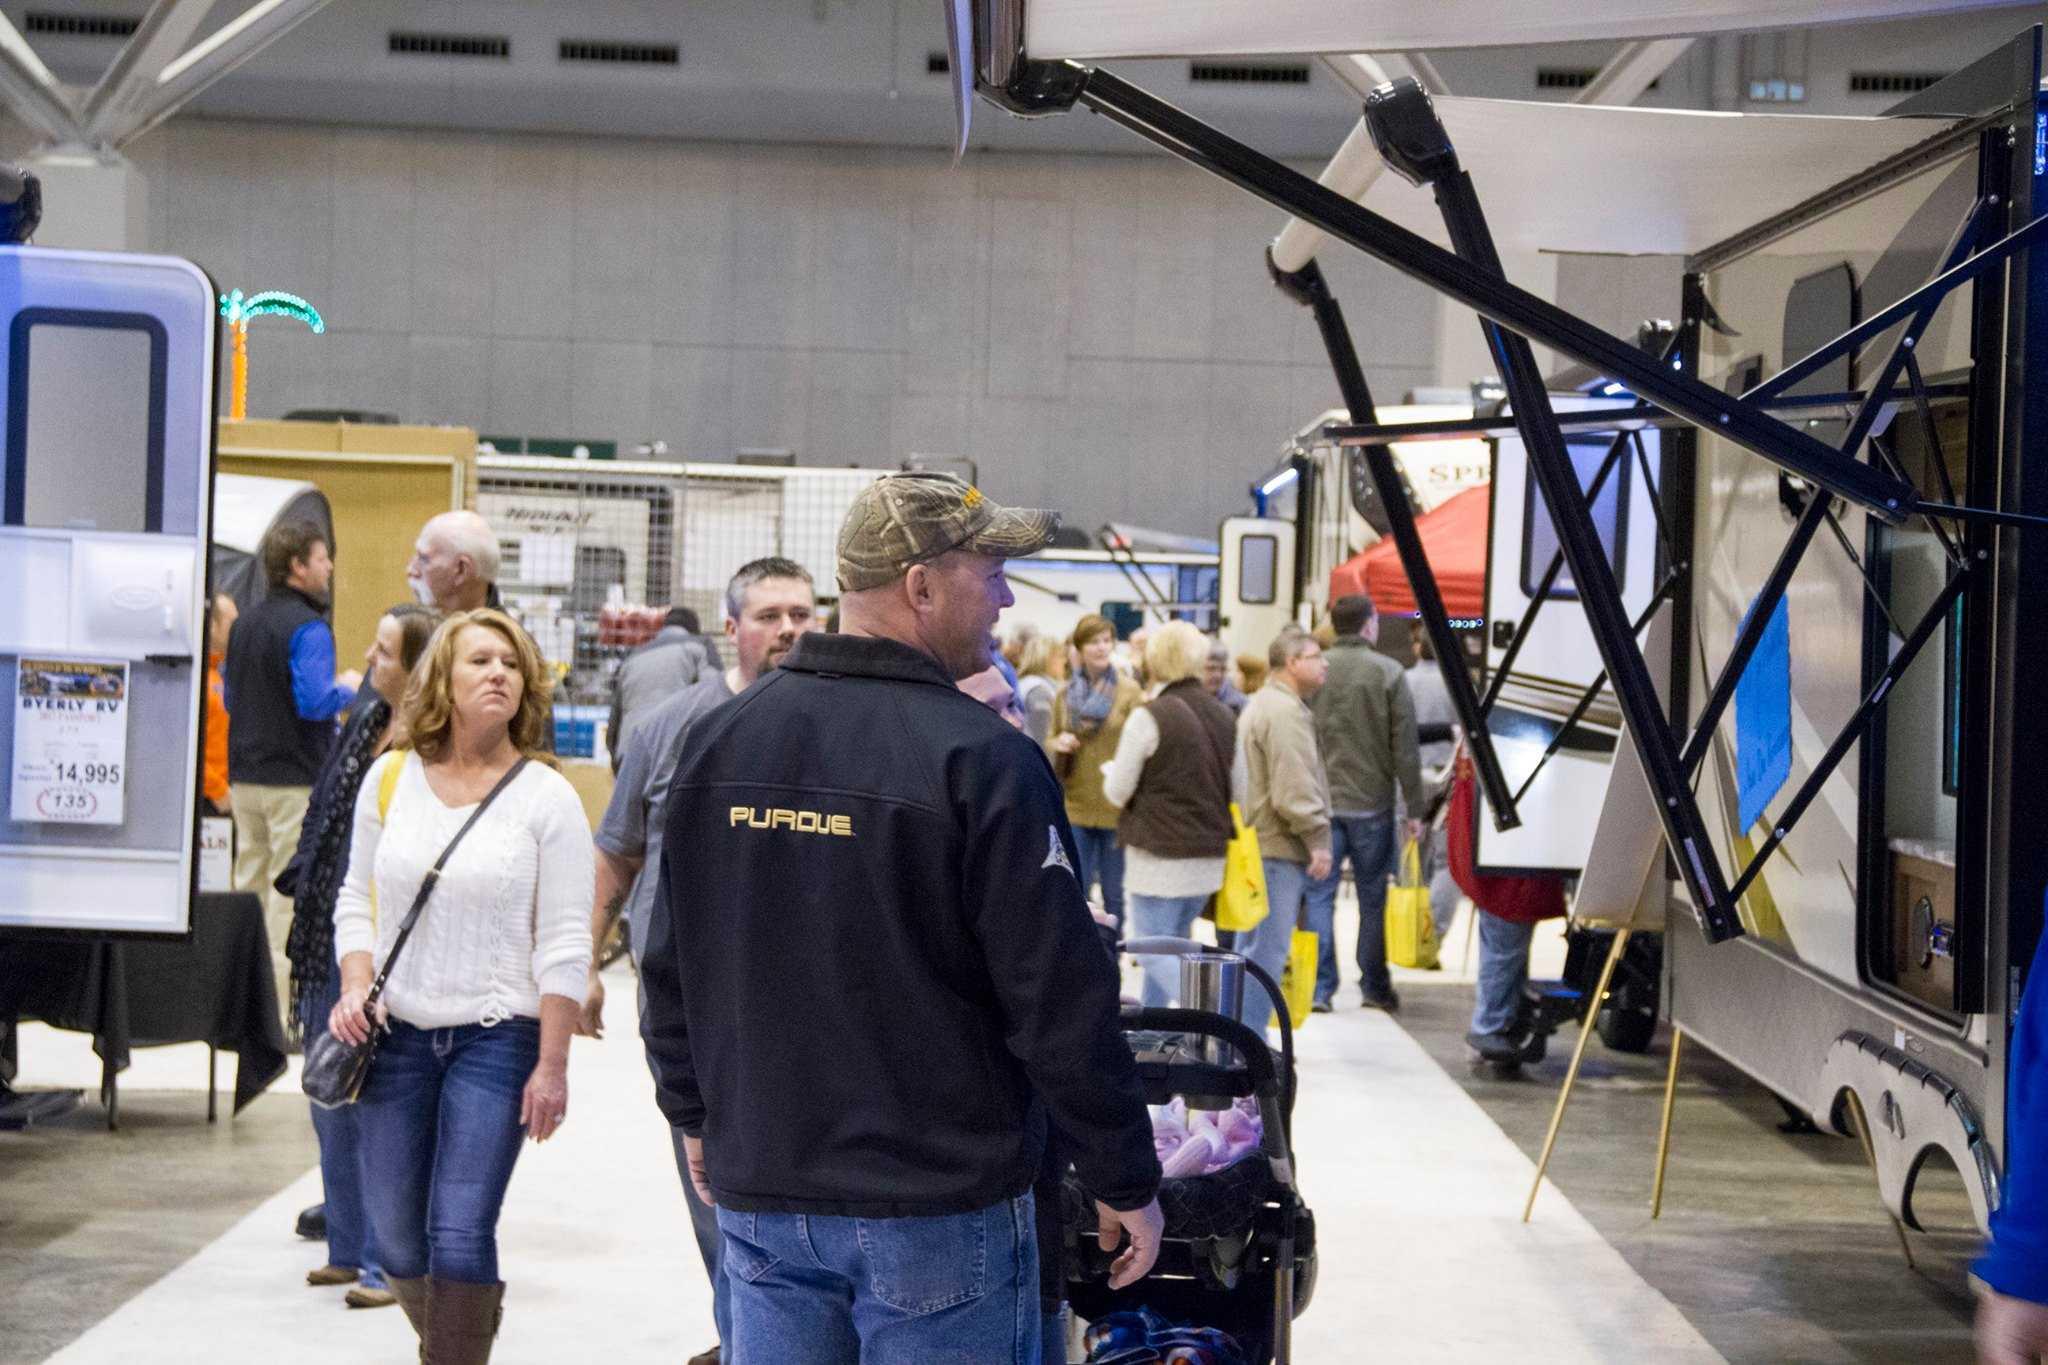 RV Vacation And Travel Show (Feb 2020), St Louis RV Vacation And Travel Show, St. Louis USA ...